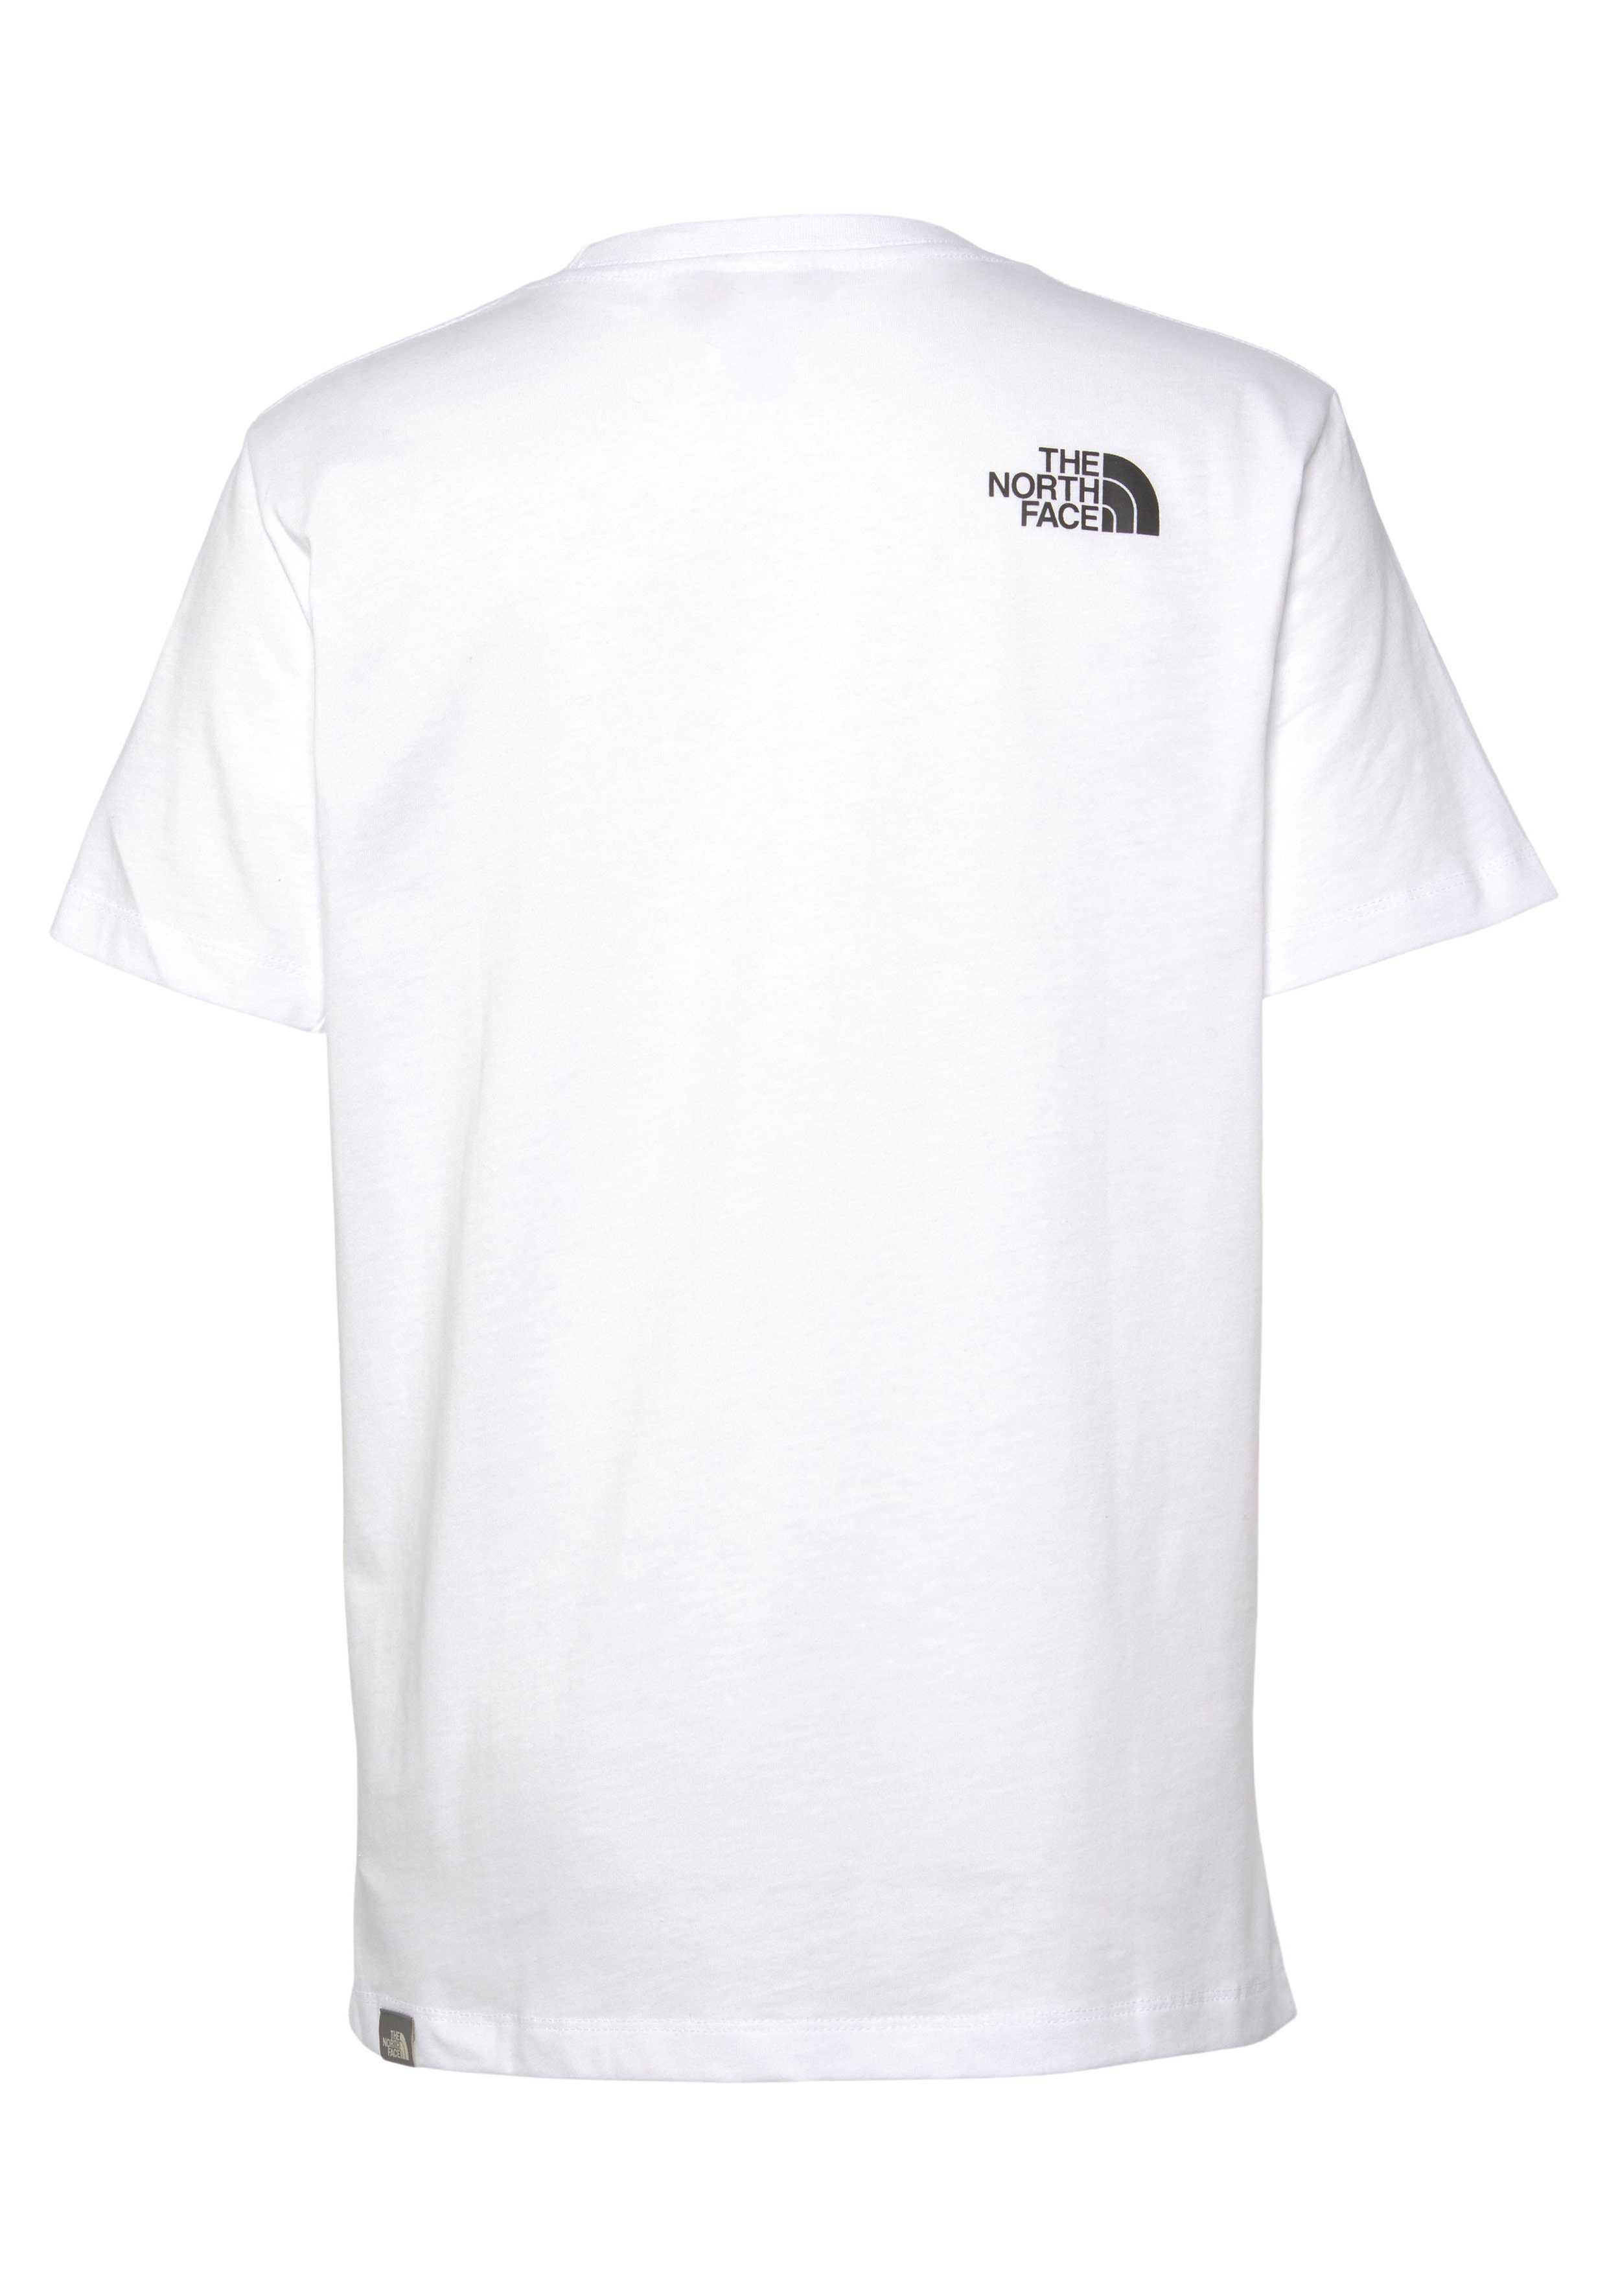 The North Face T-Shirt white - TEE EASY Kinder für